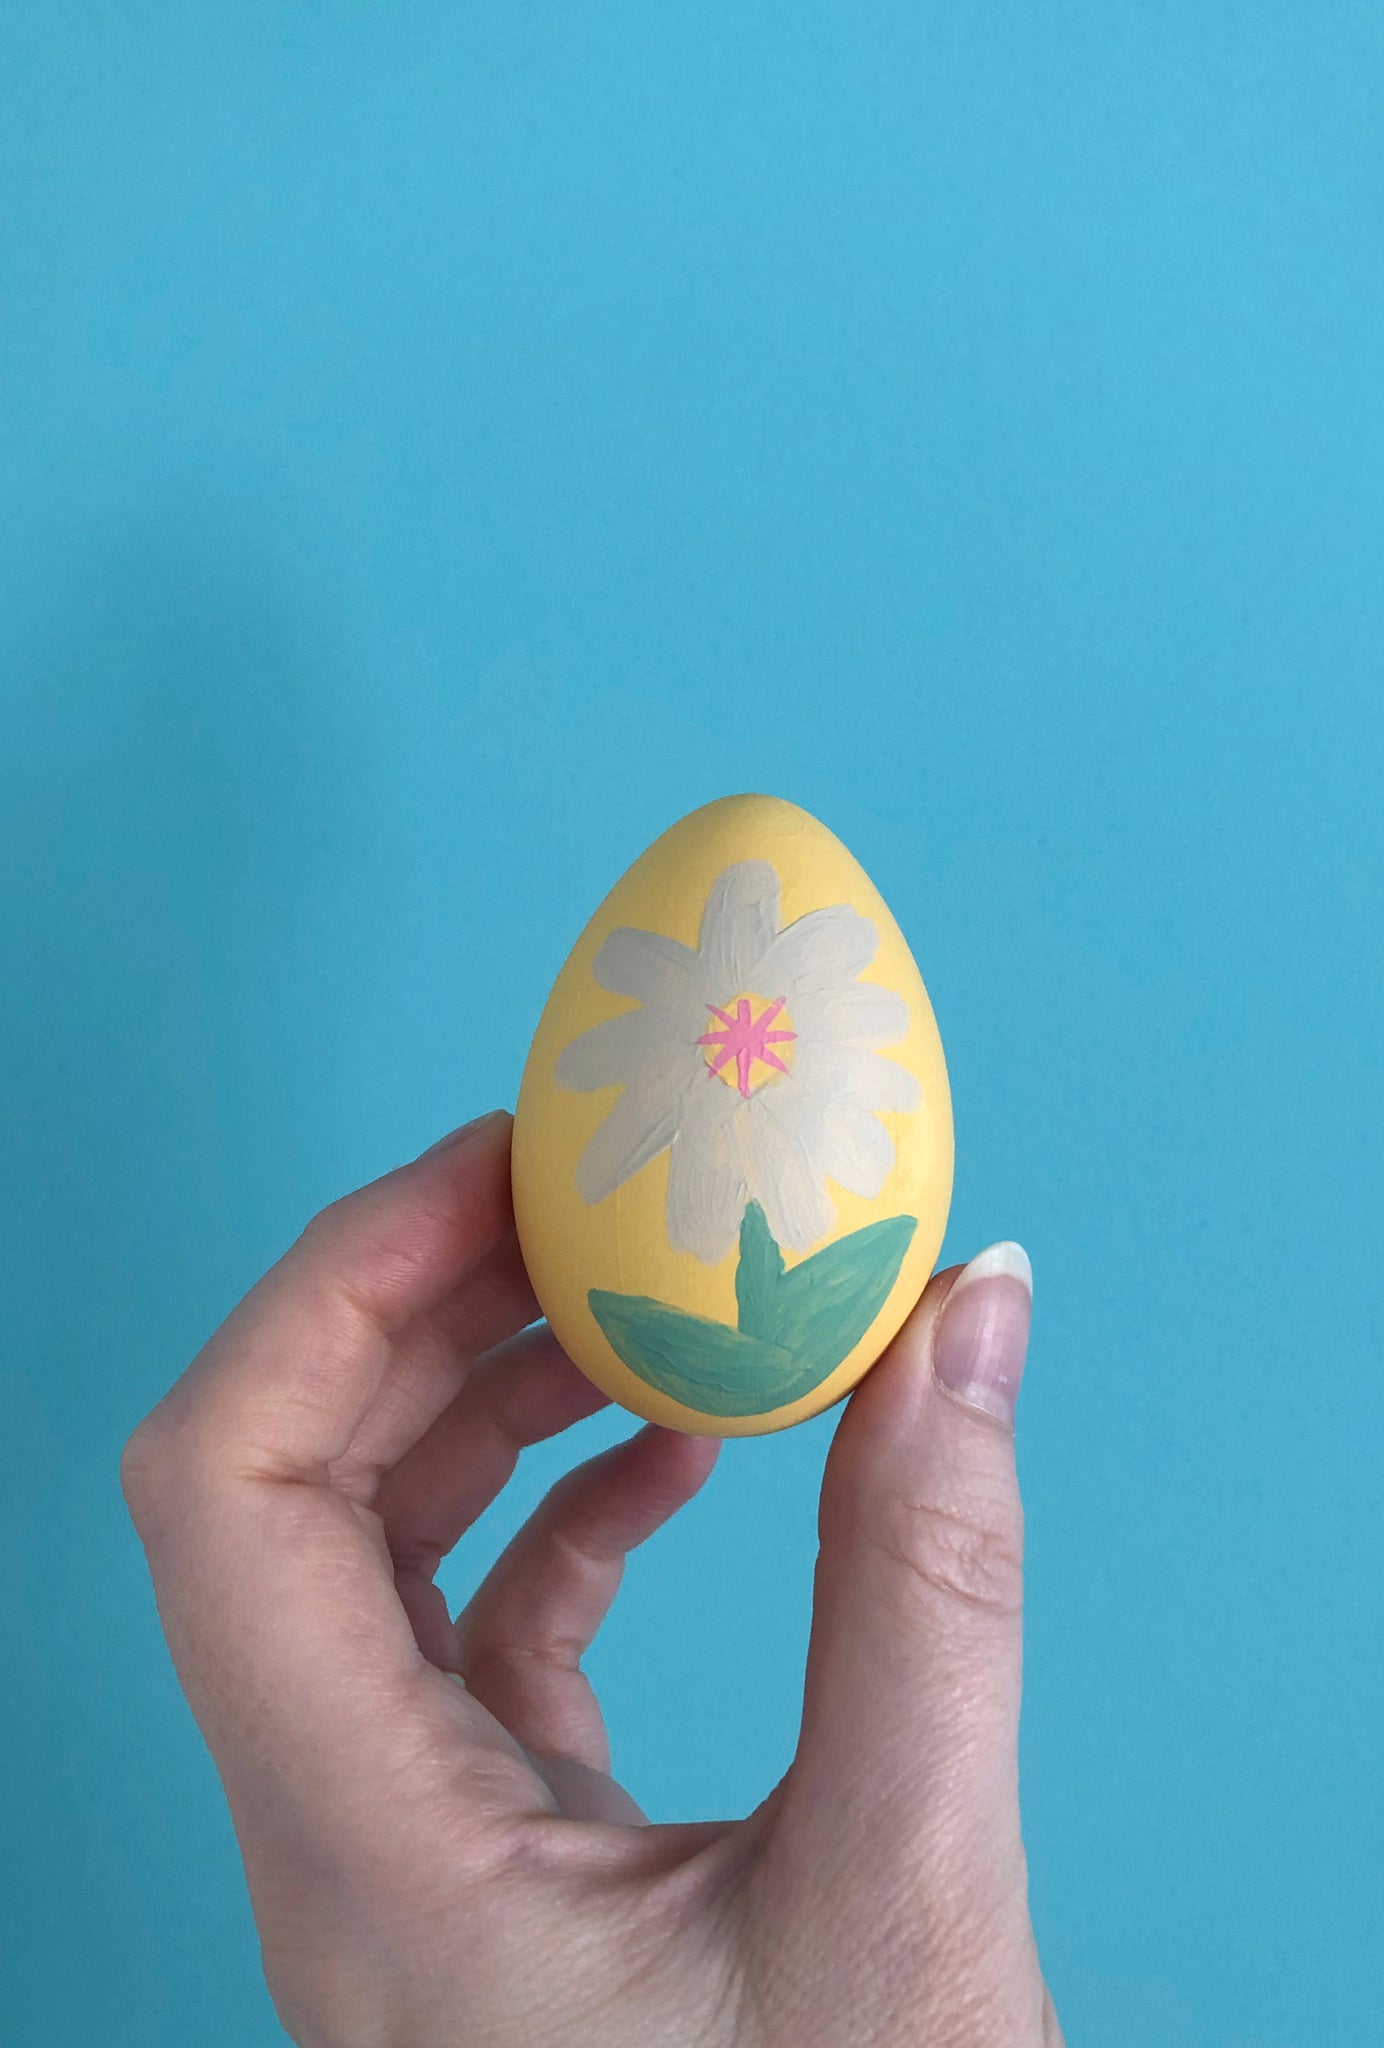 Finished painted daisy on Easter egg crafts for kids with blue background